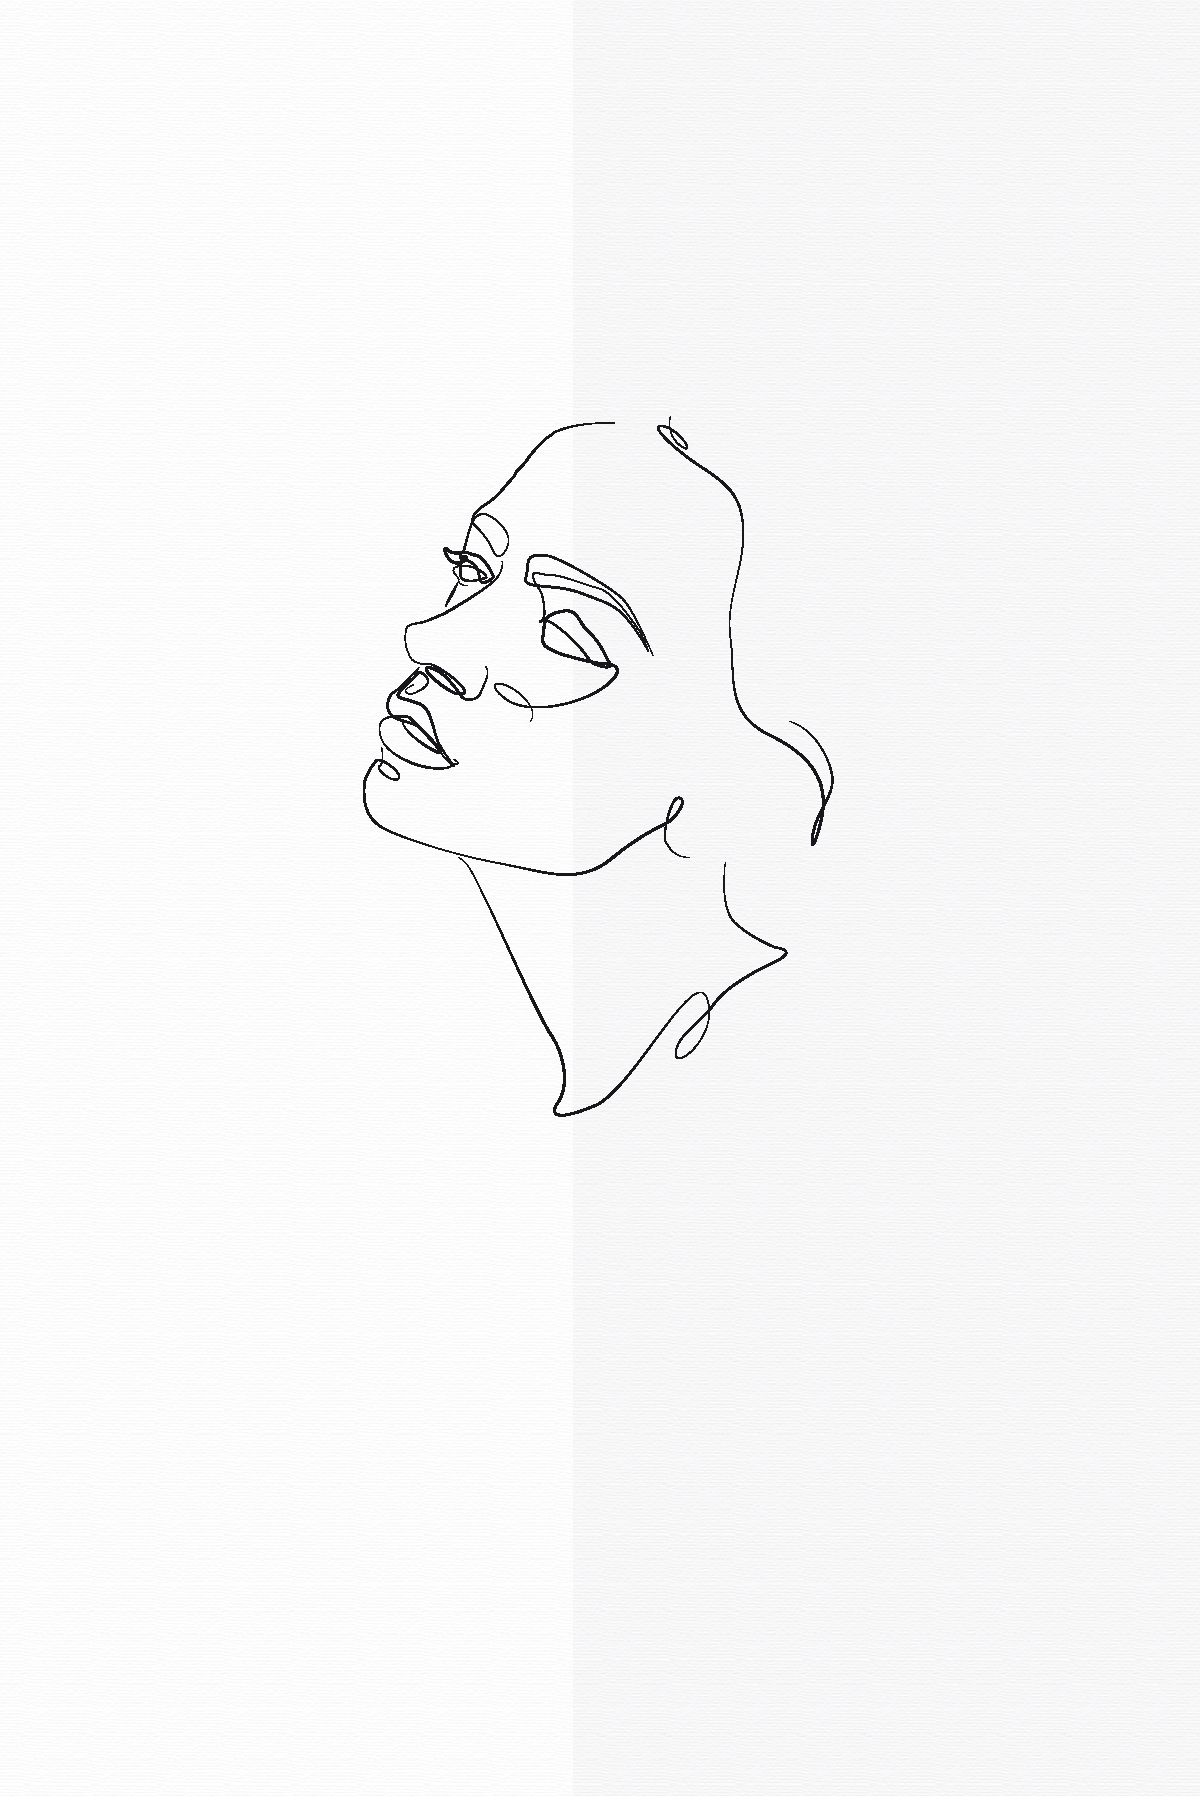 Minimalist Drawings   Beautiful Line Art and Simple Sketches